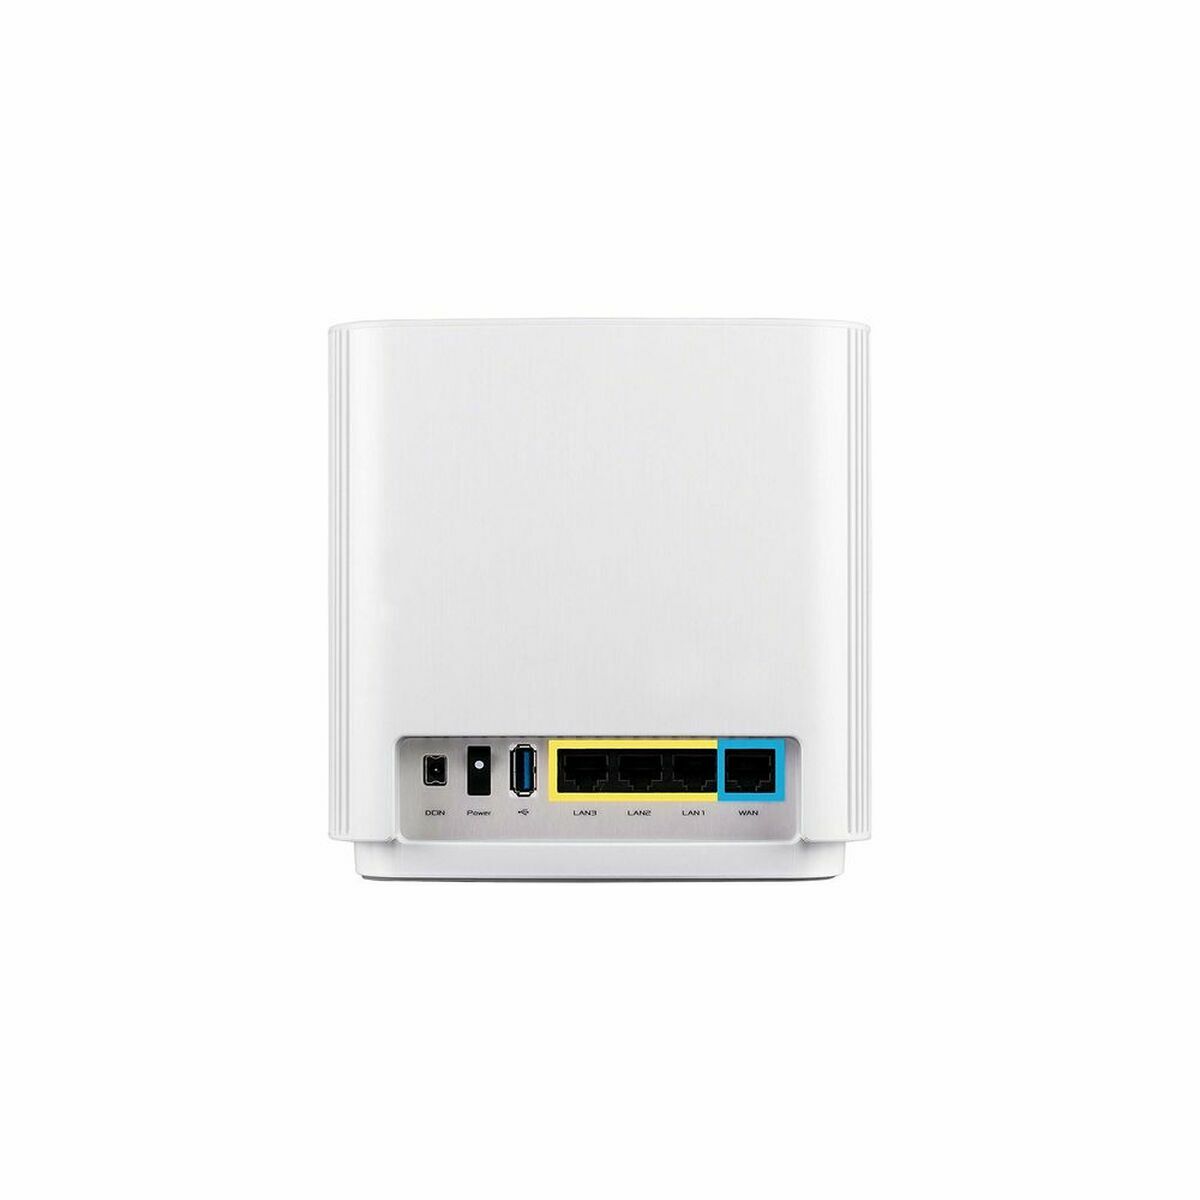 Access point Asus 90IG0590-MO3G30-1